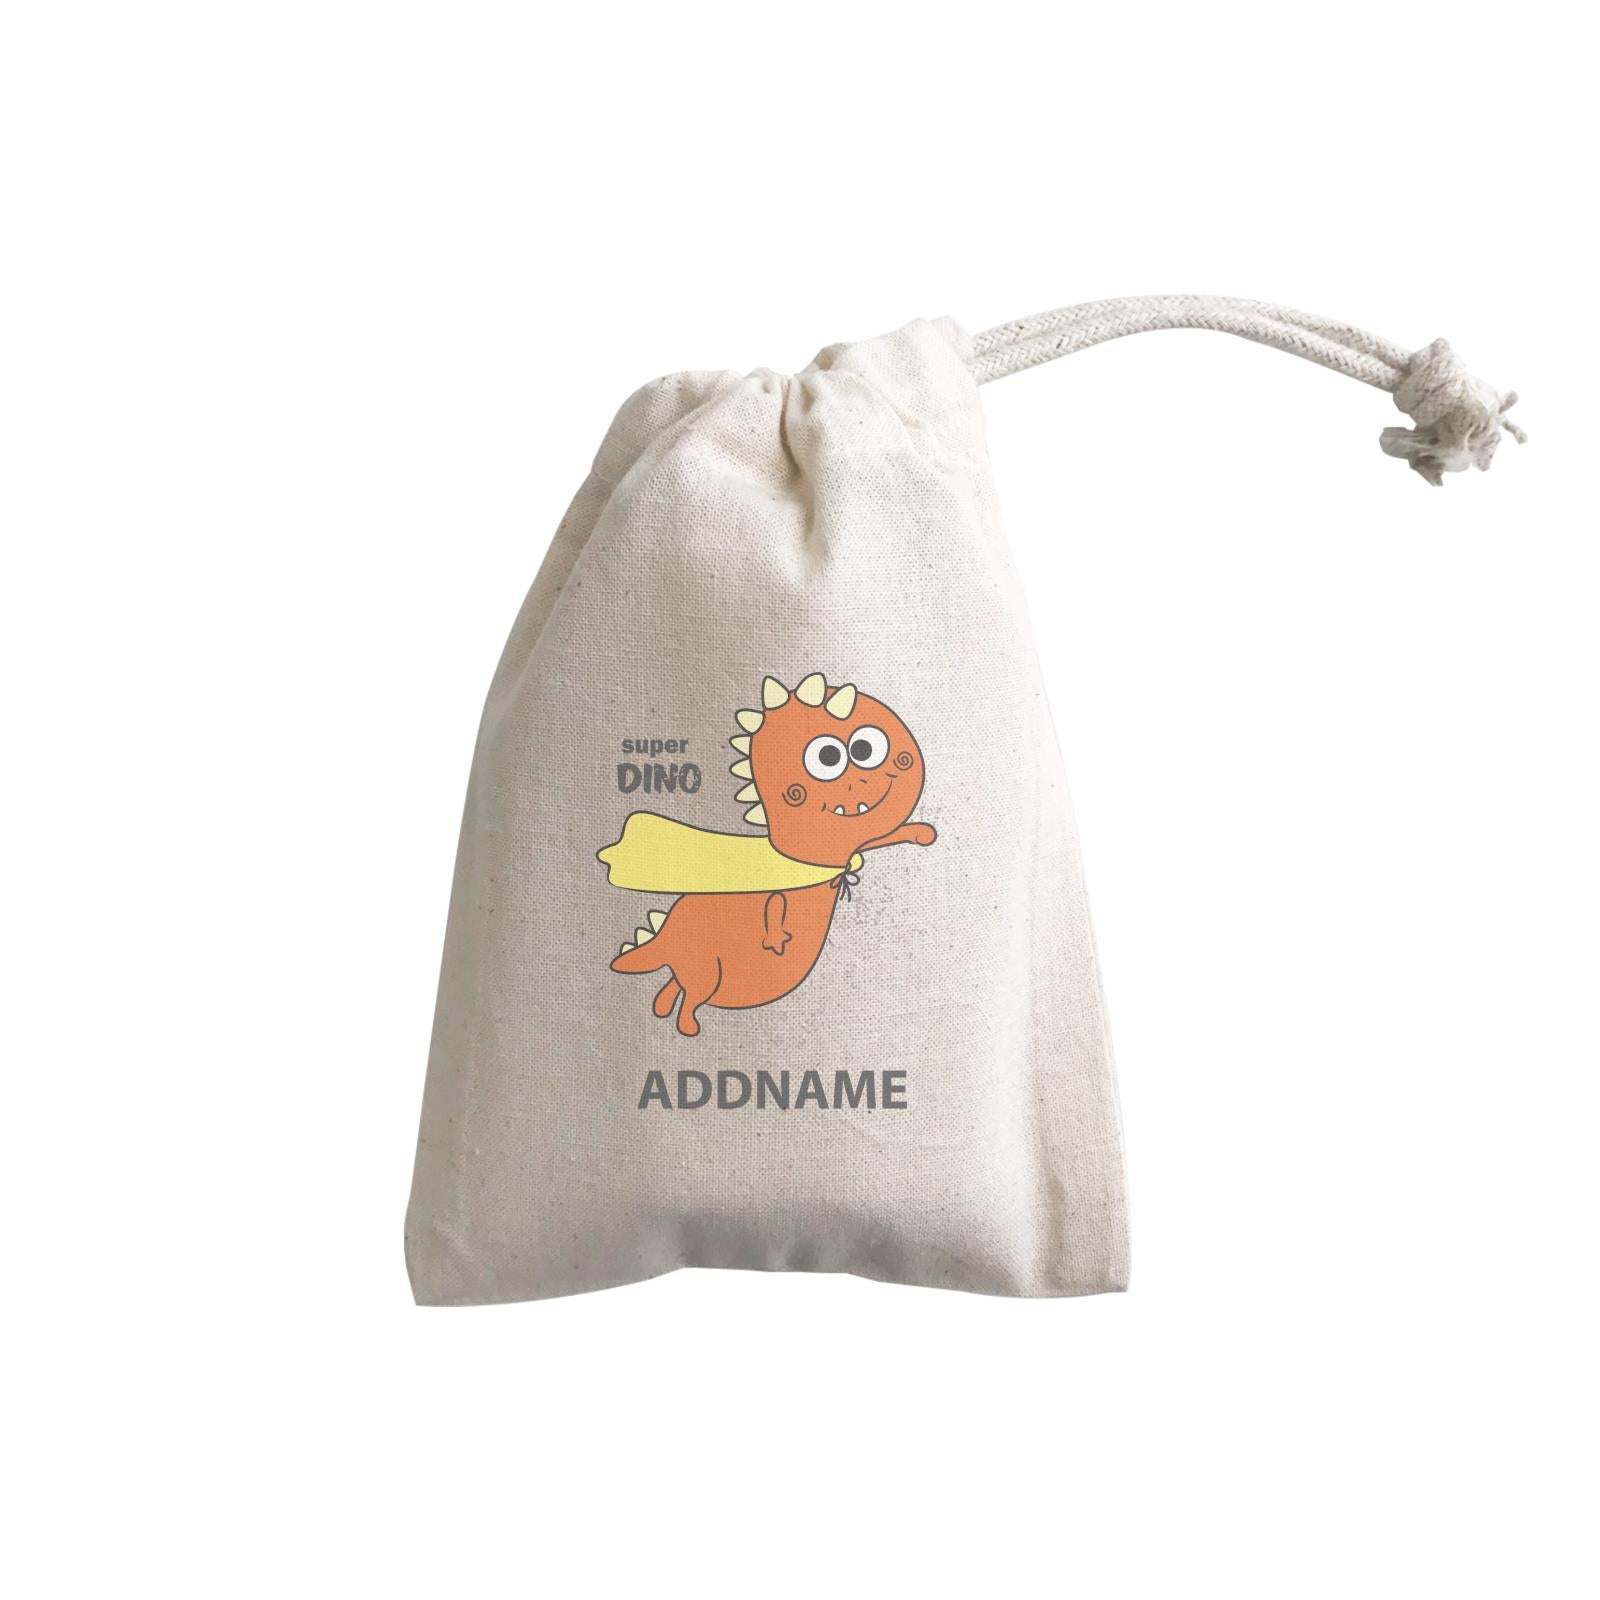 Cool Cute Dinosaur Super Dino Addname GP Gift Pouch